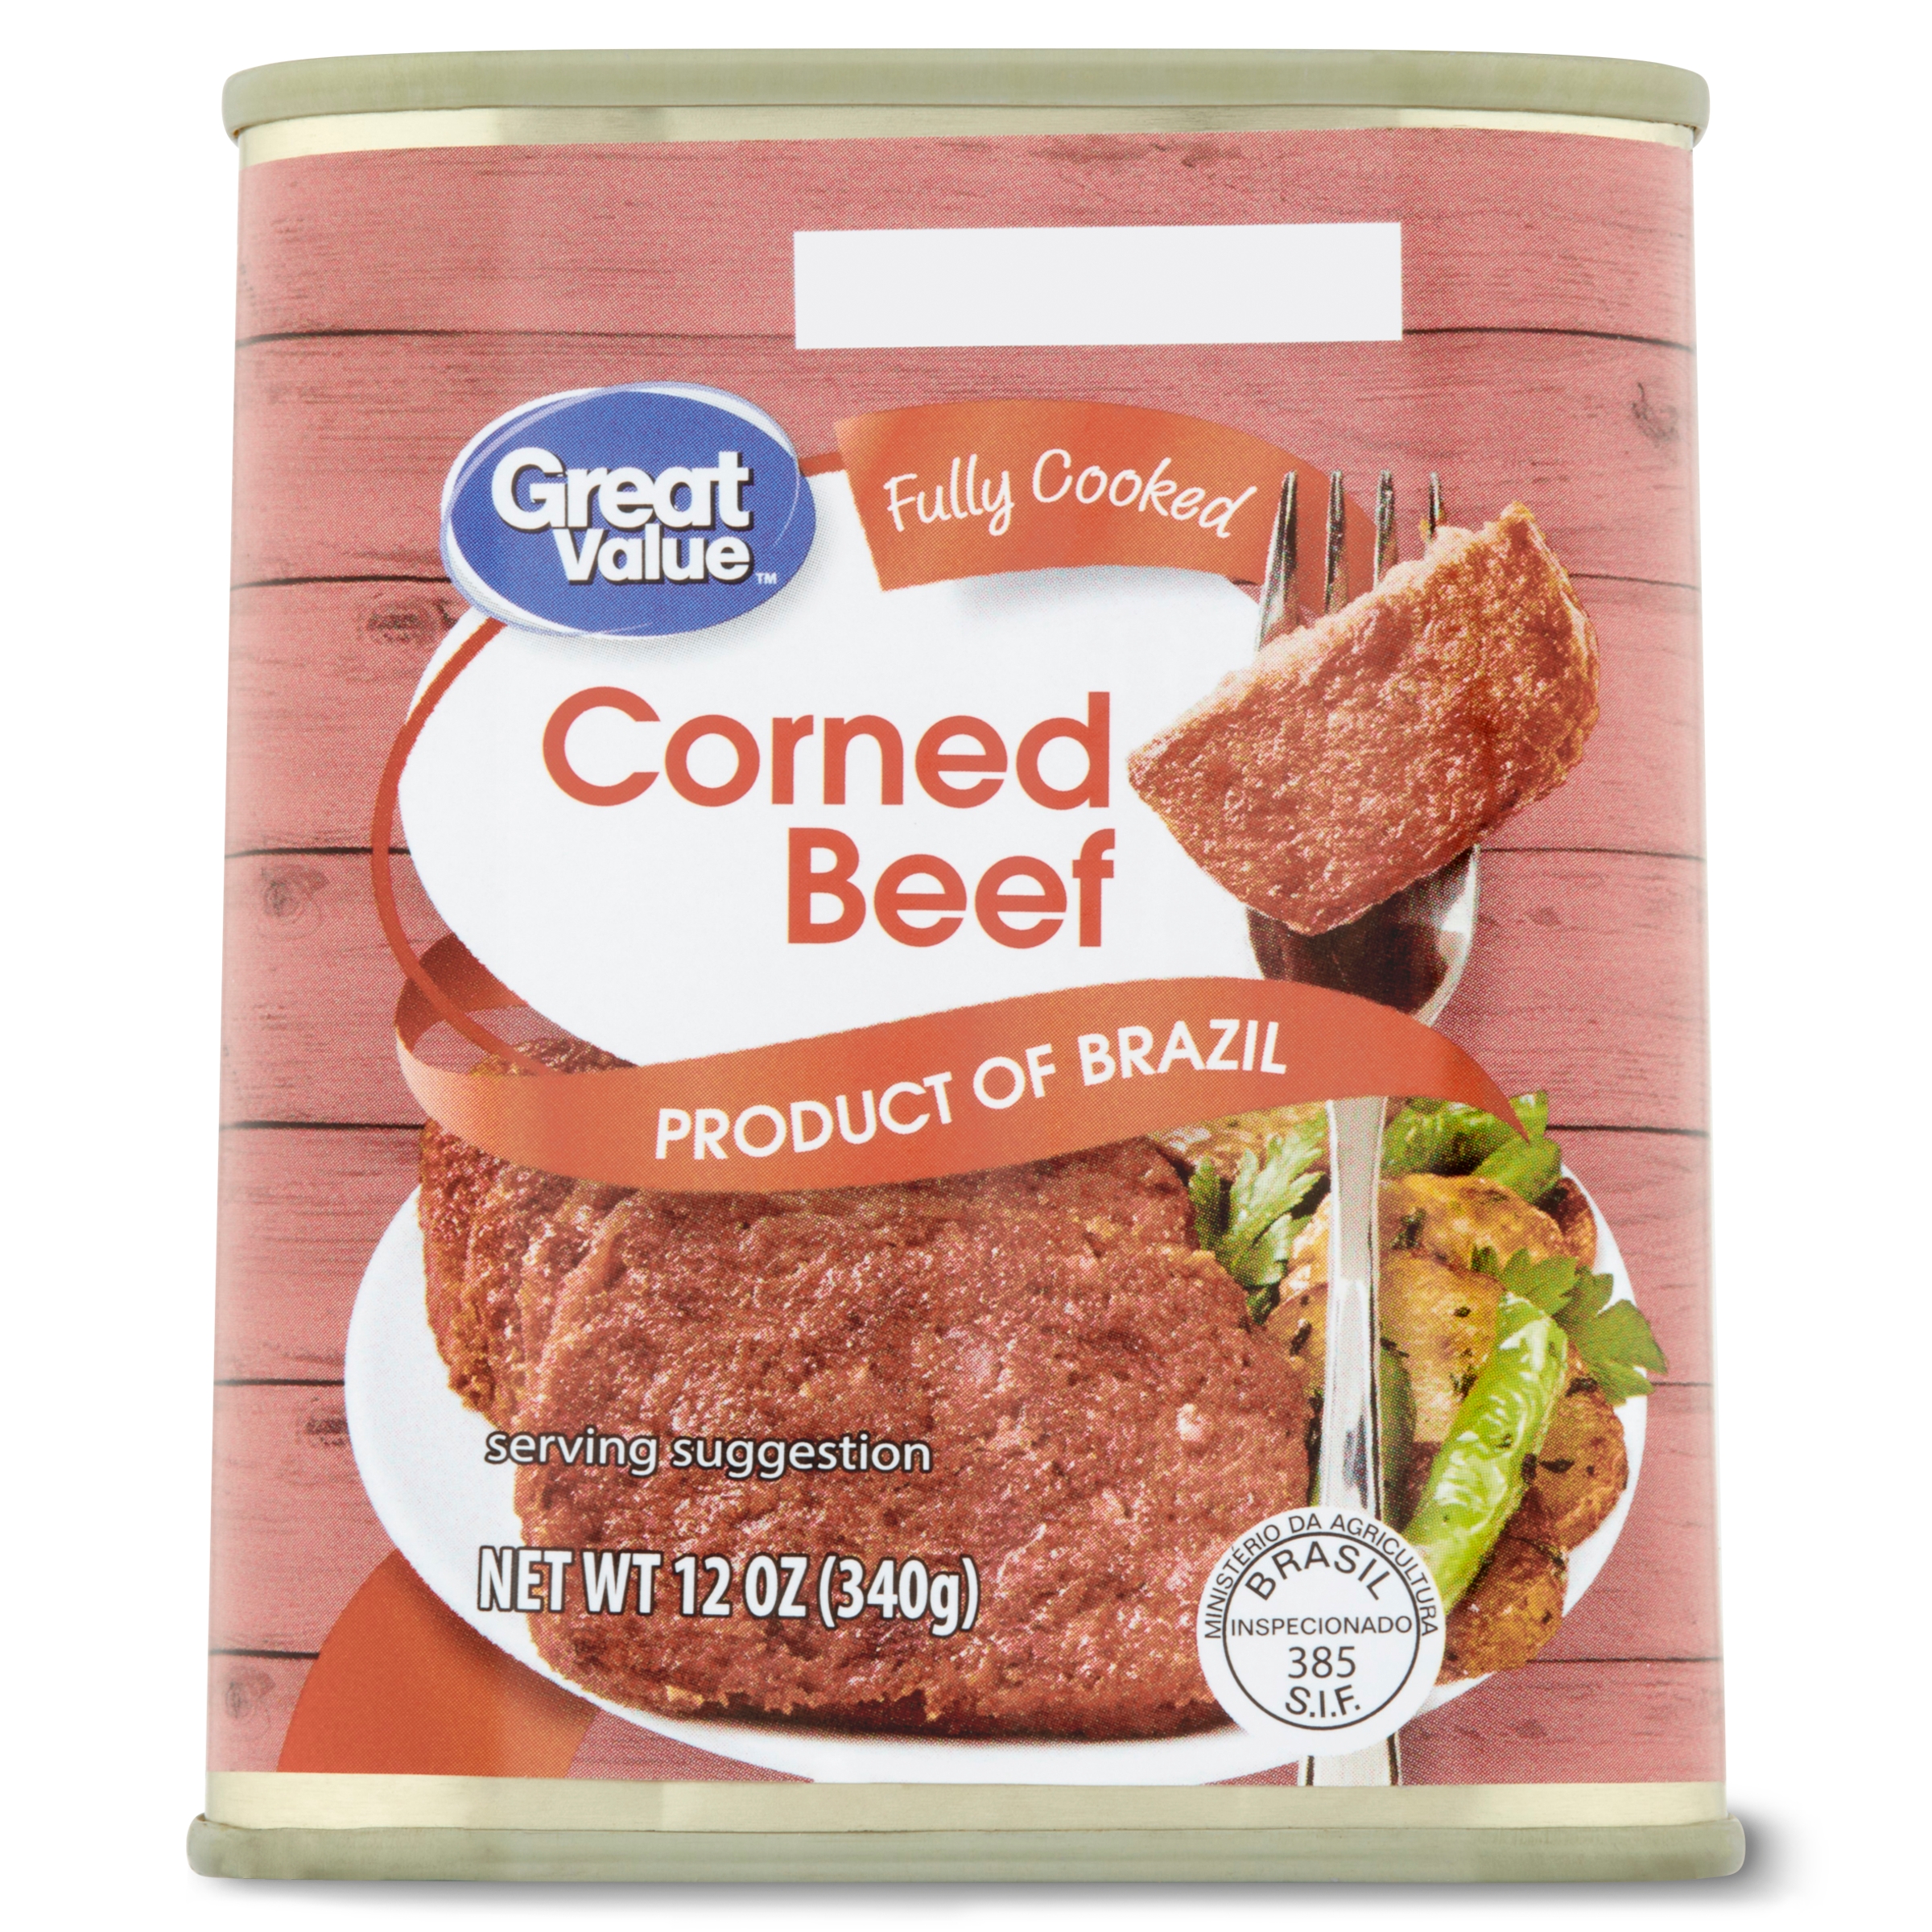 Great Value Corned Beef, 12 oz - image 1 of 7